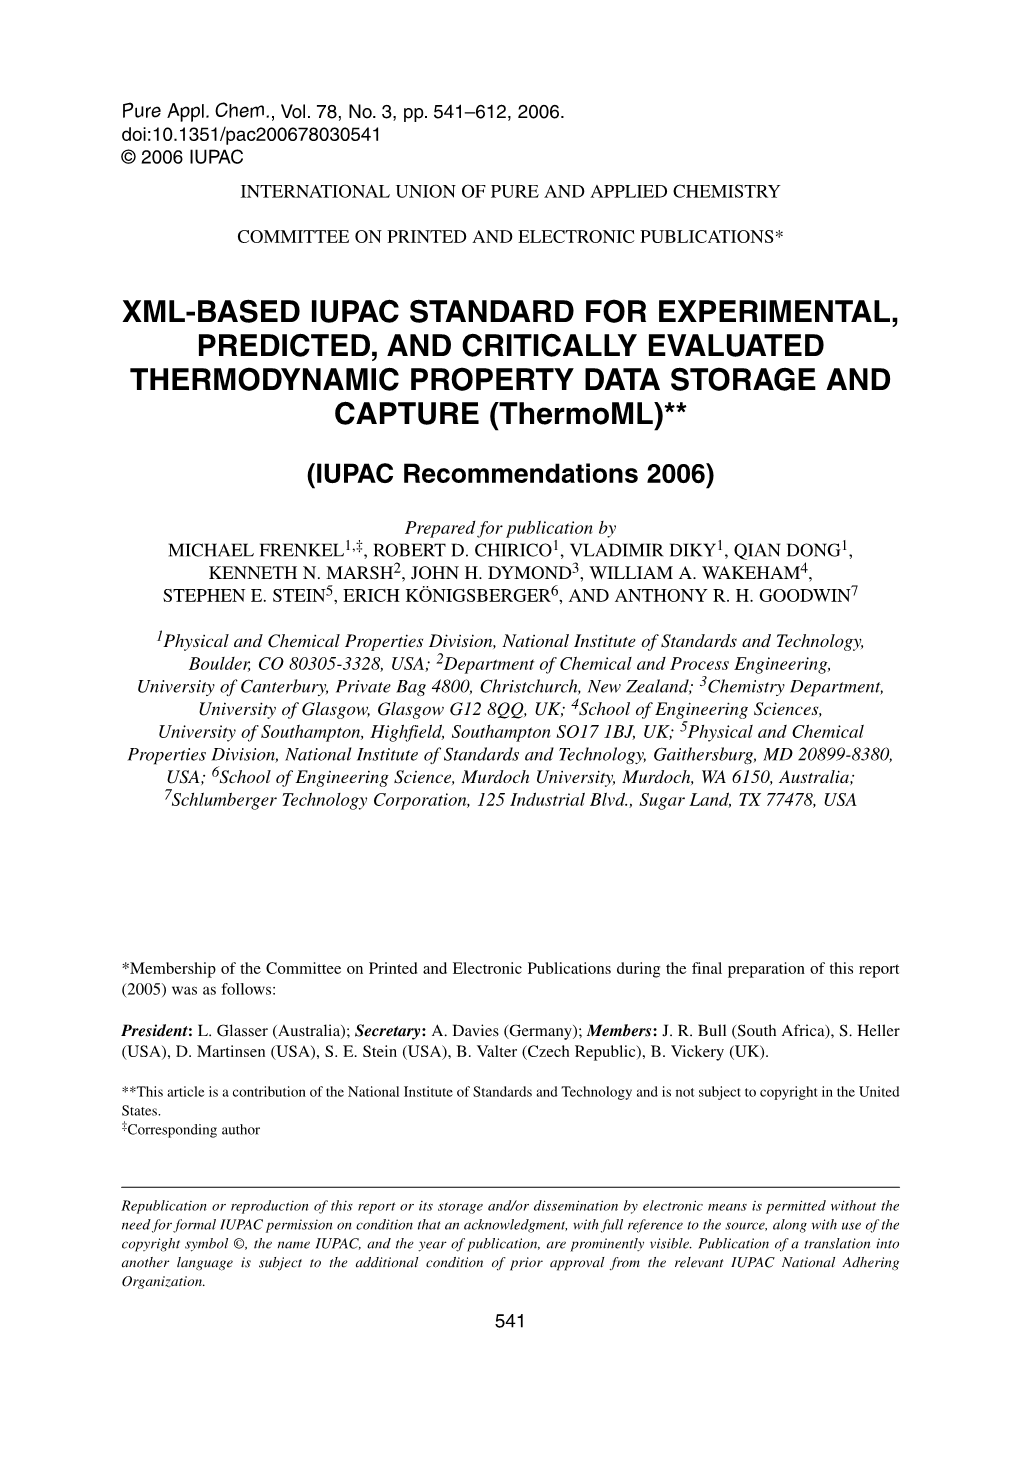 XML-BASED IUPAC STANDARD for EXPERIMENTAL, PREDICTED, and CRITICALLY EVALUATED THERMODYNAMIC PROPERTY DATA STORAGE and CAPTURE (Thermoml)**